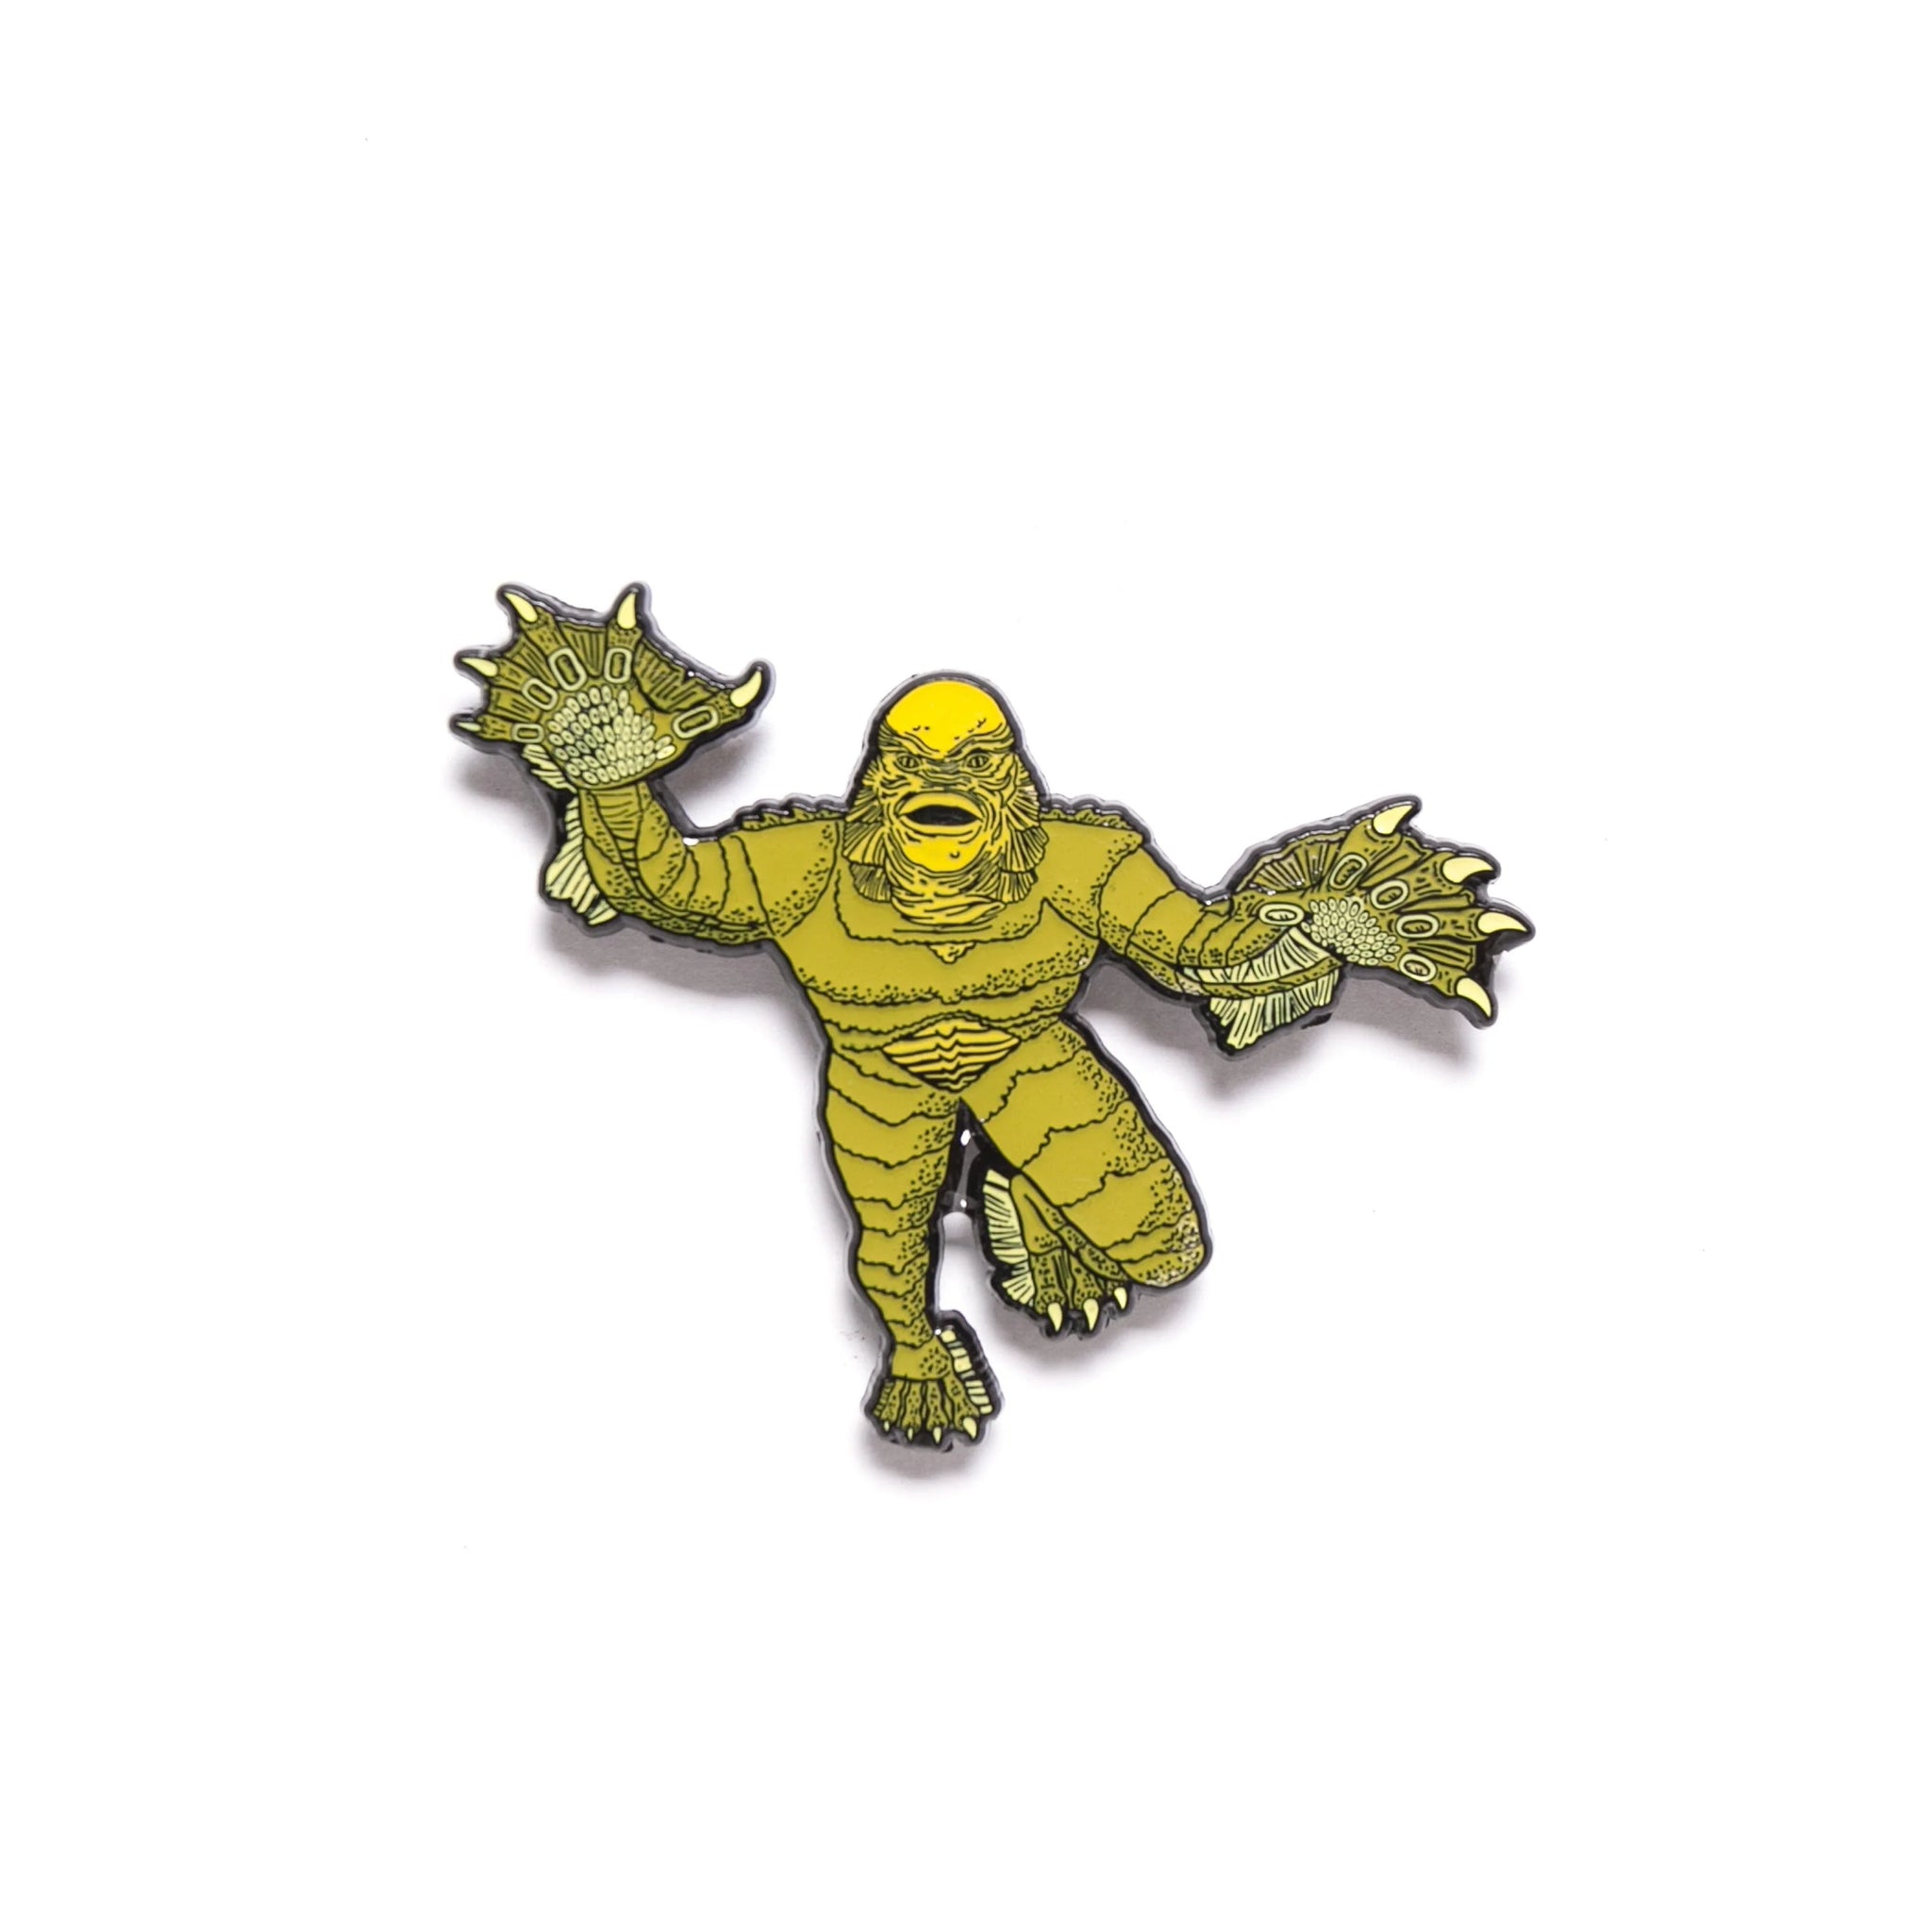 Creature From the Black Lagoon Enamel Pin from Nerd Imports